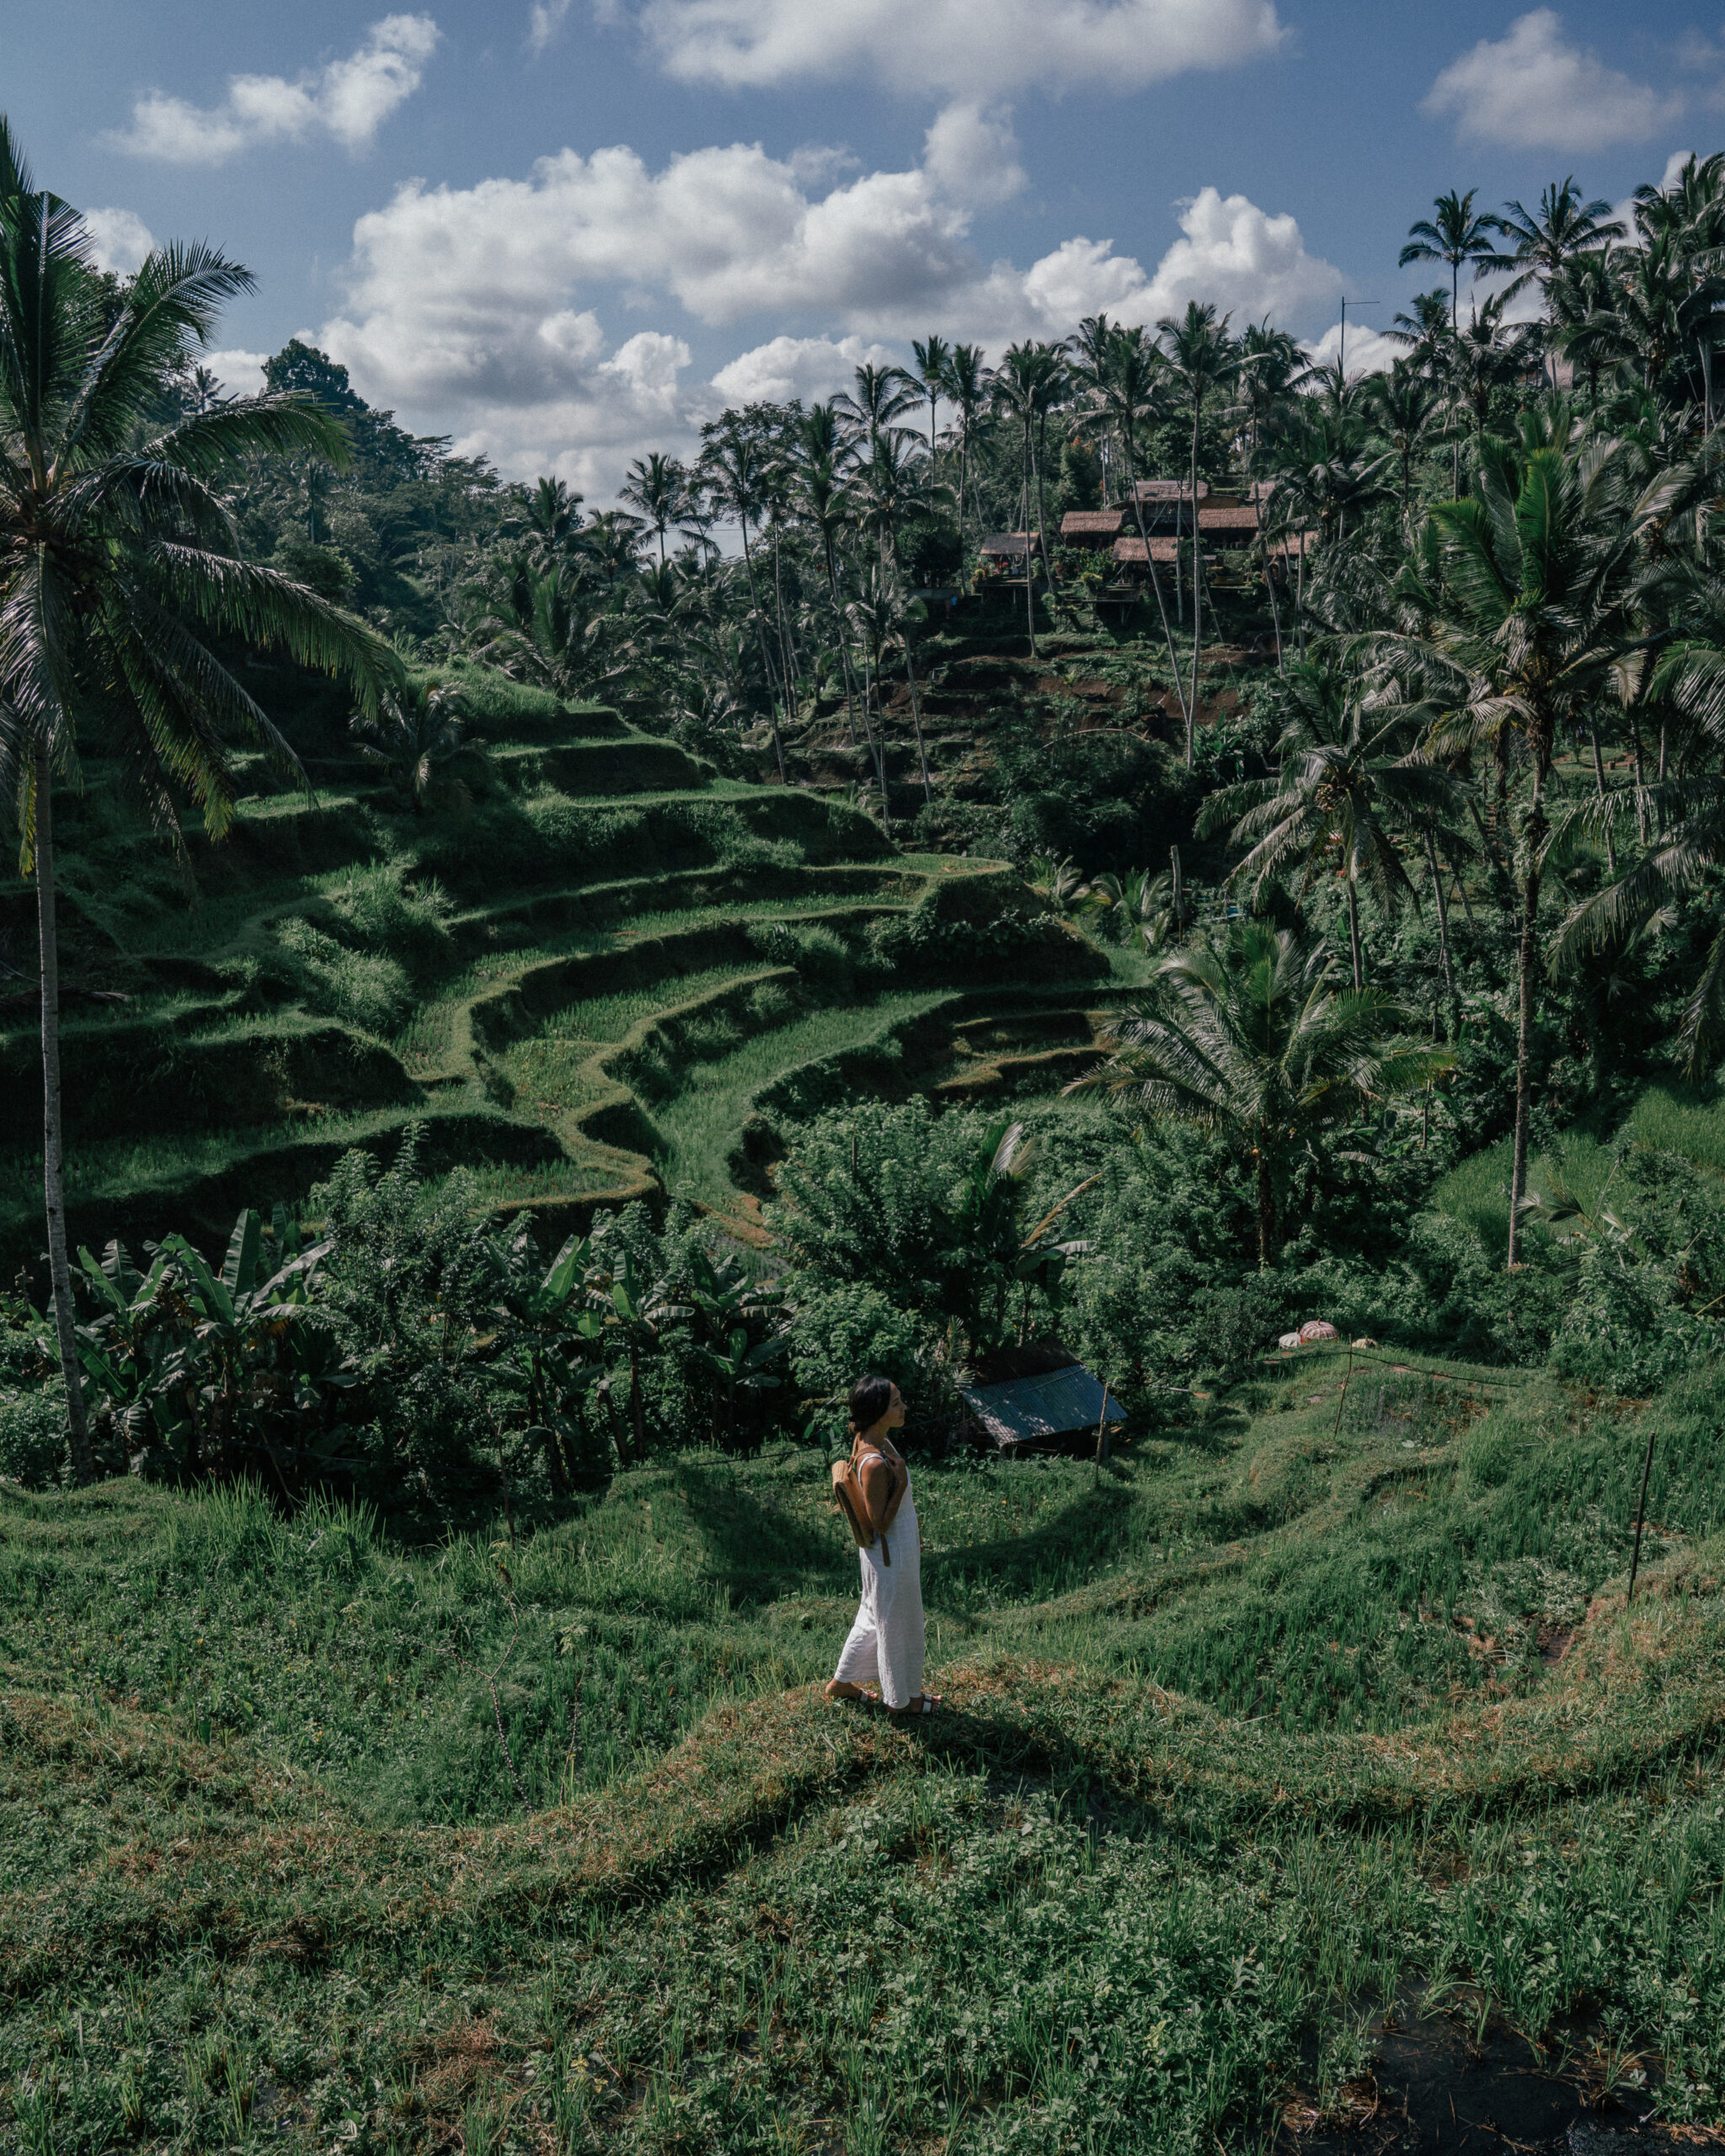 A complete travel guide to Ubud, Bali including the best places to visit, temples, waterfalls, markets, day trips, photo locations, hotels, restaurants, private guides and drivers, as well as a 5-day itinerary.